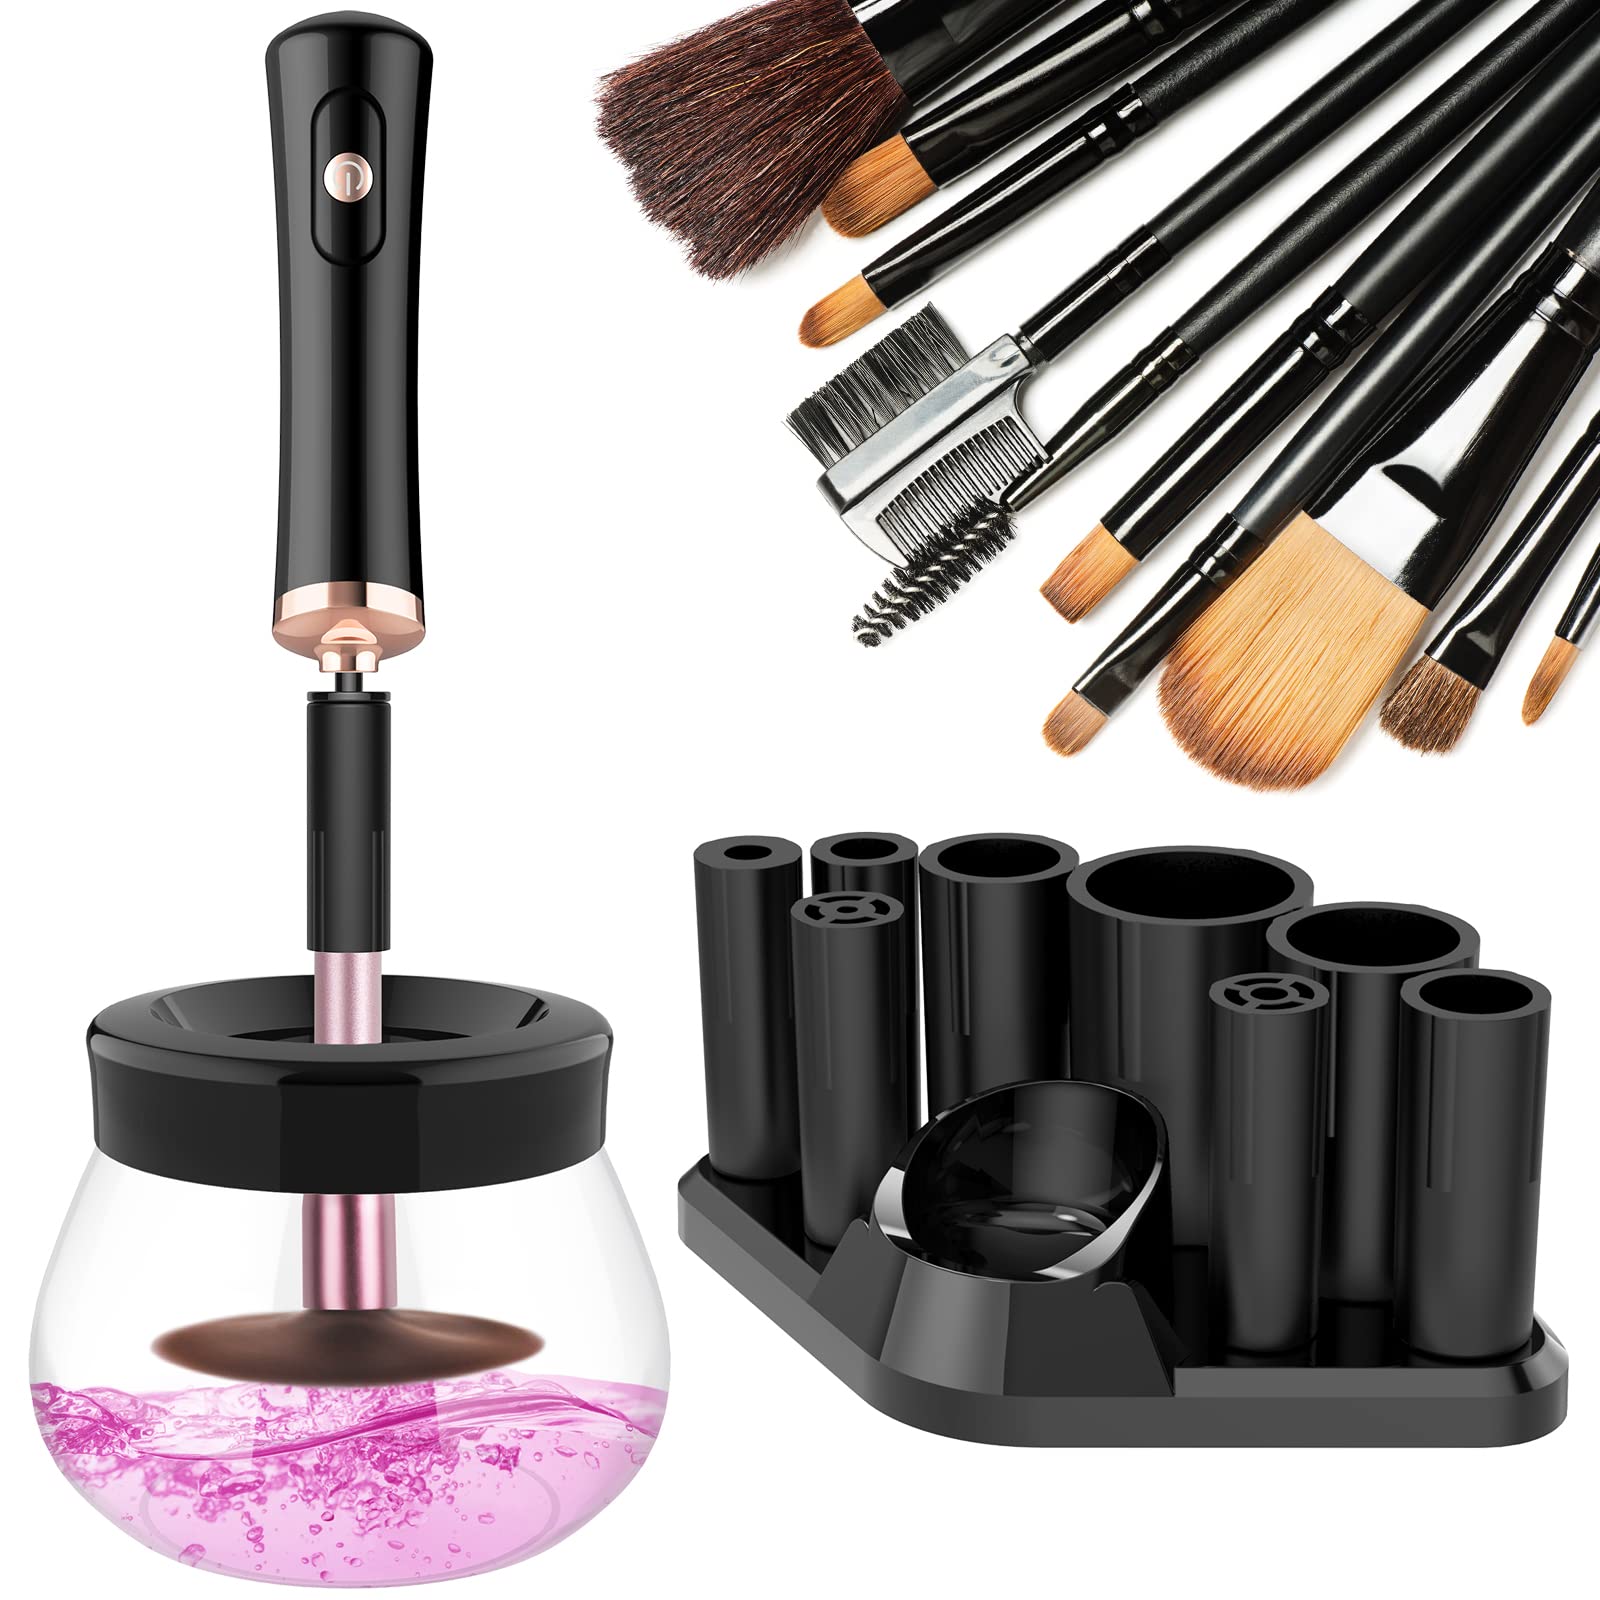 Fesmey Makeup Brush Automatic Cleaner Machine,Super-Fast Electric